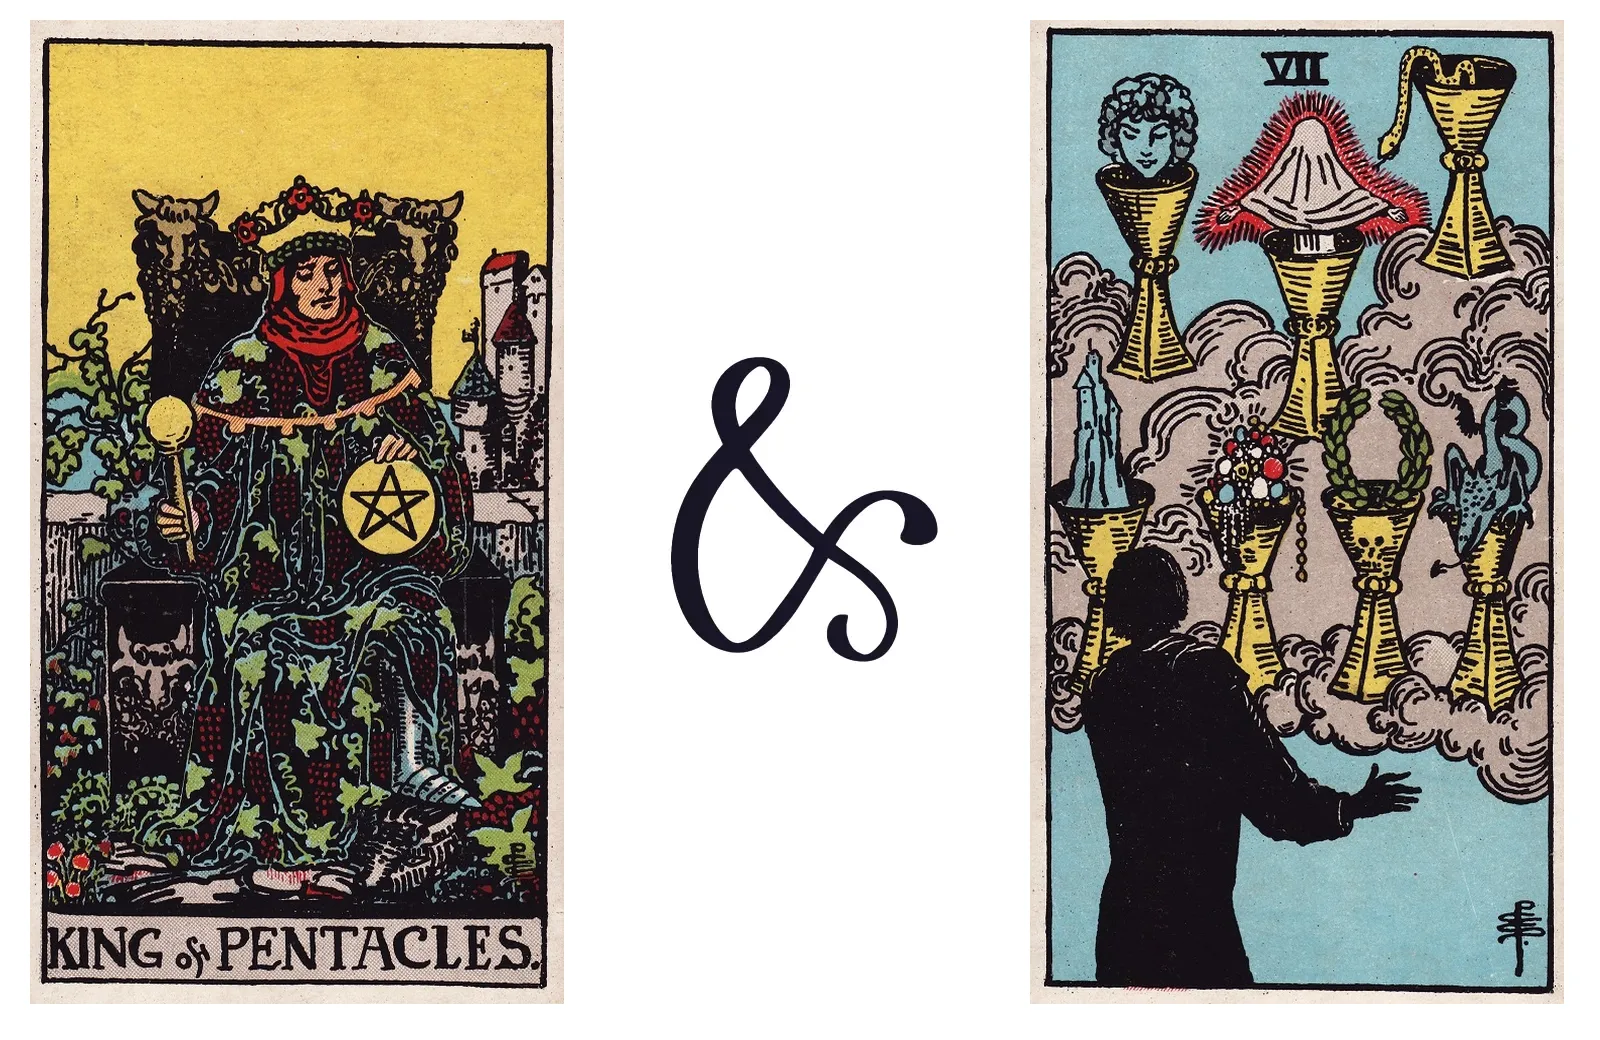 King of Pentacles and Seven of Cups